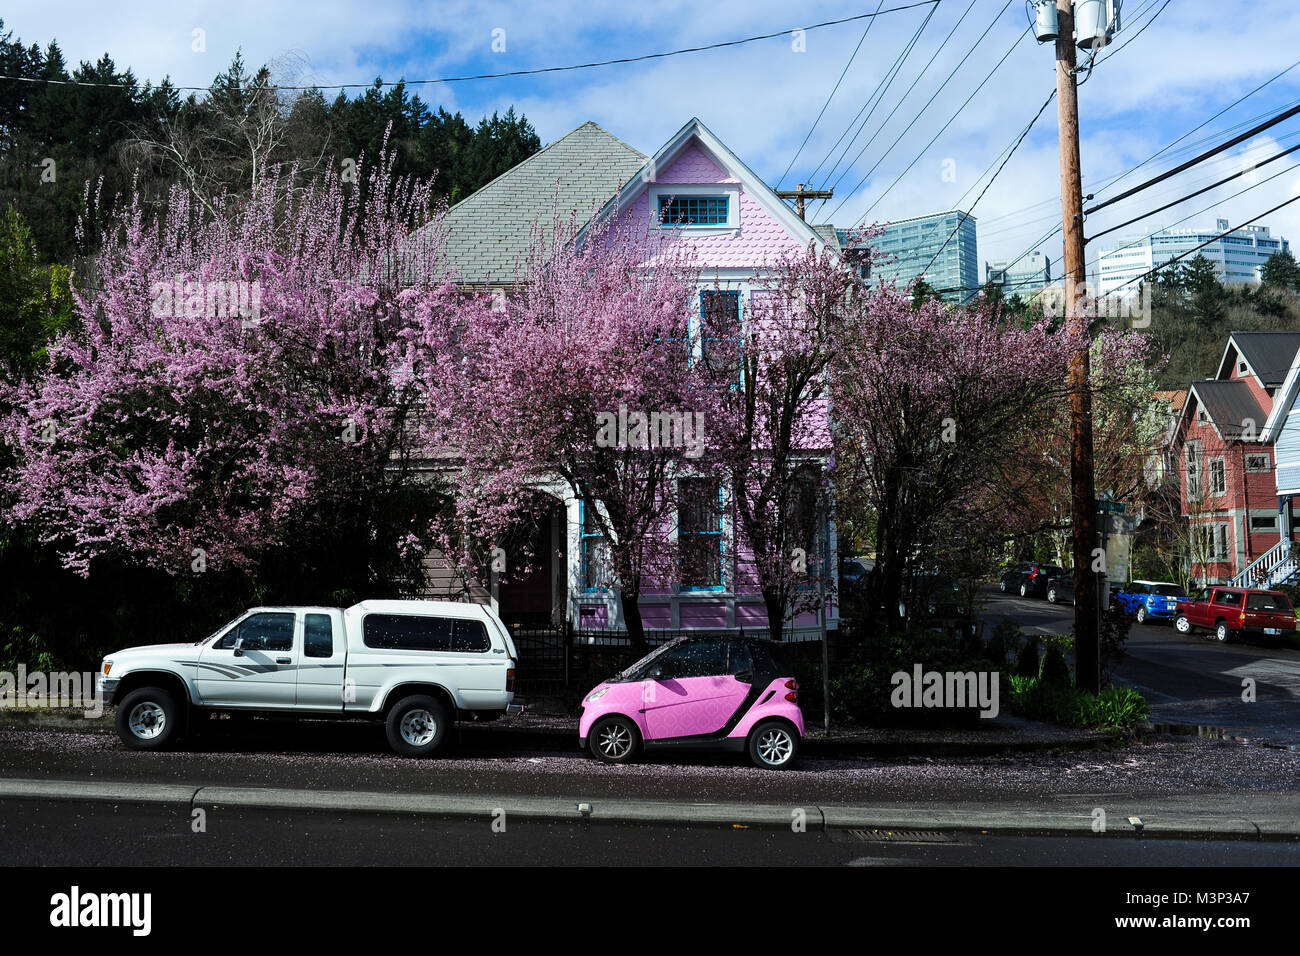 A pink car is parked beneath a tree with pink flowers in Portland, Oregon. Stock Photo